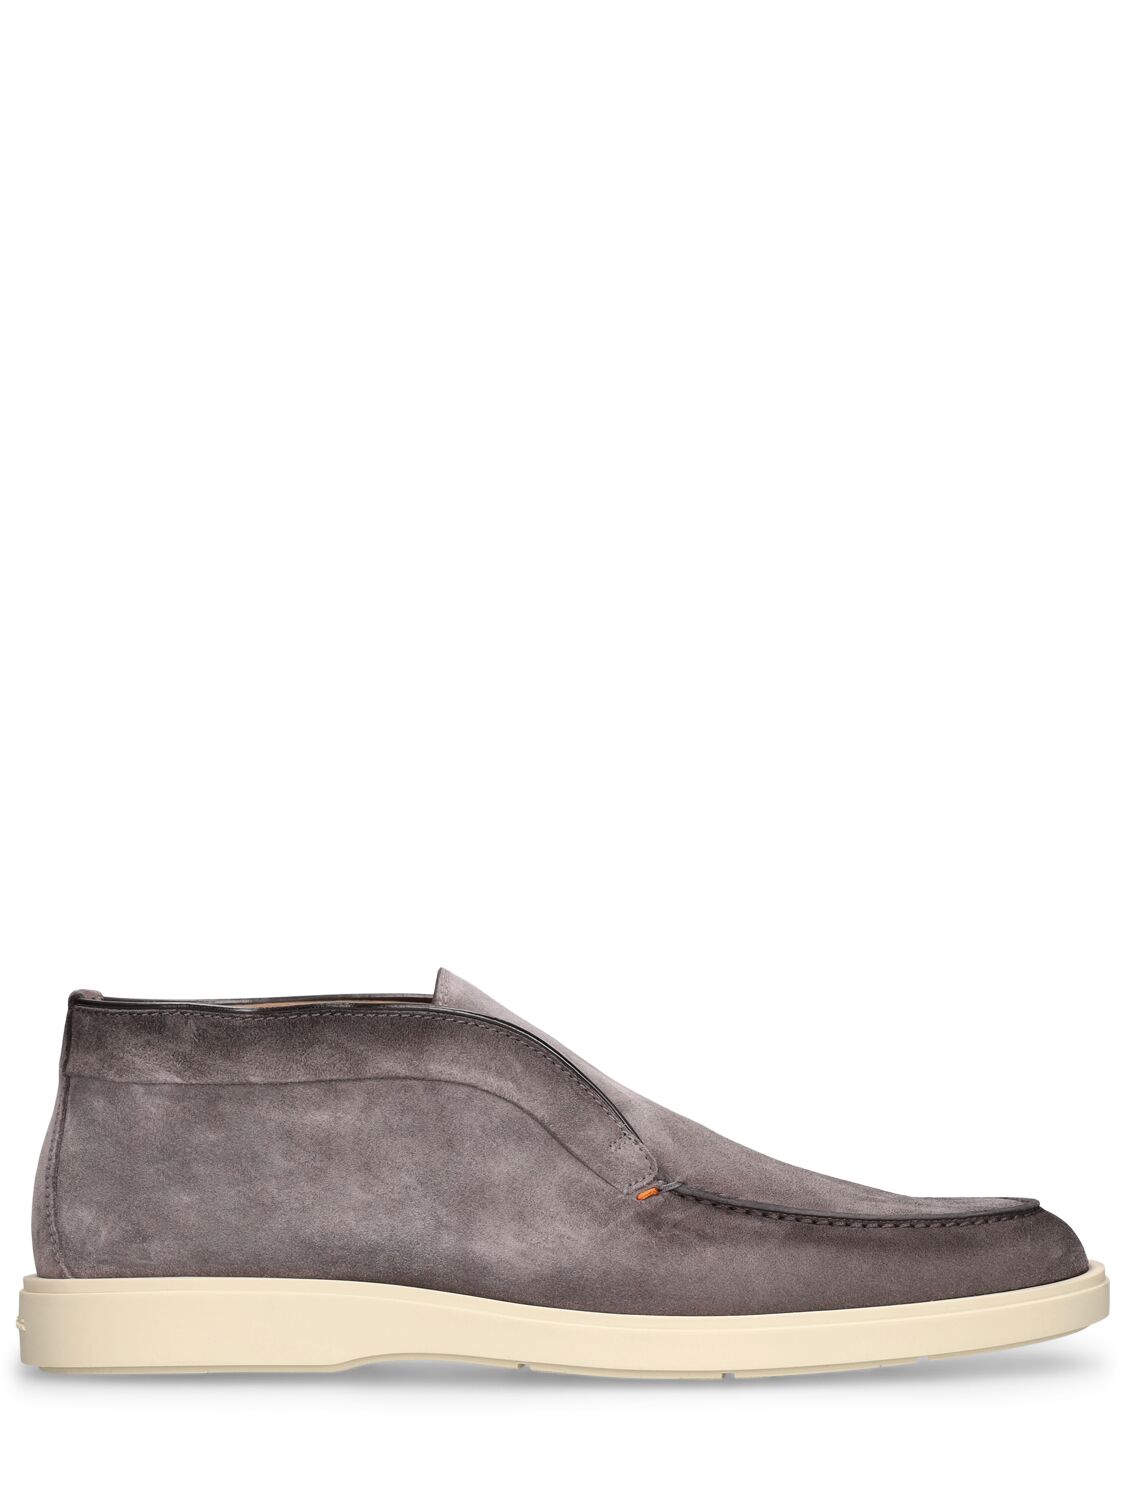 Image of Suede Desert Boots